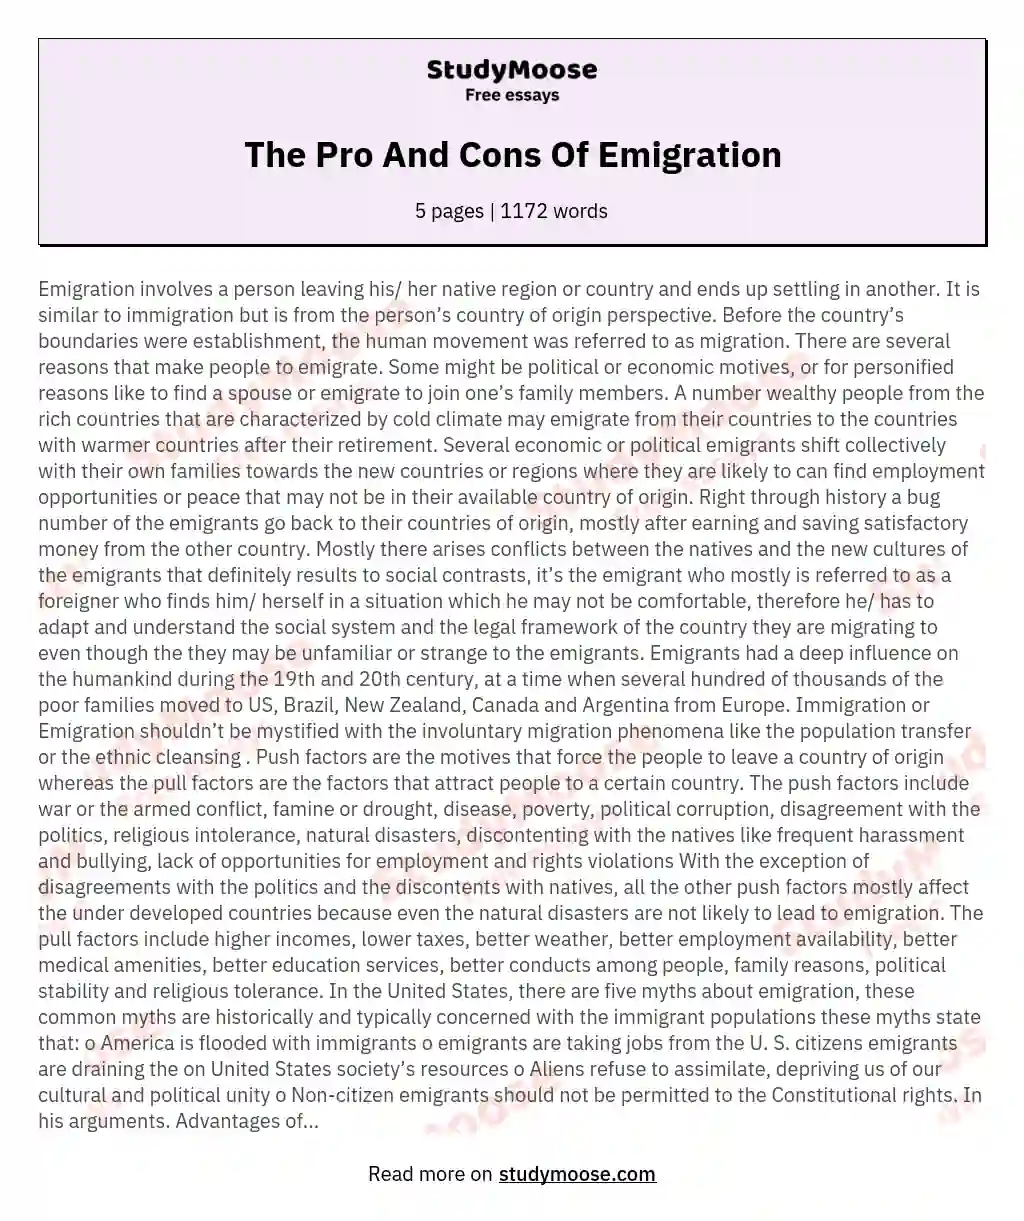 The Pro And Cons Of Emigration essay